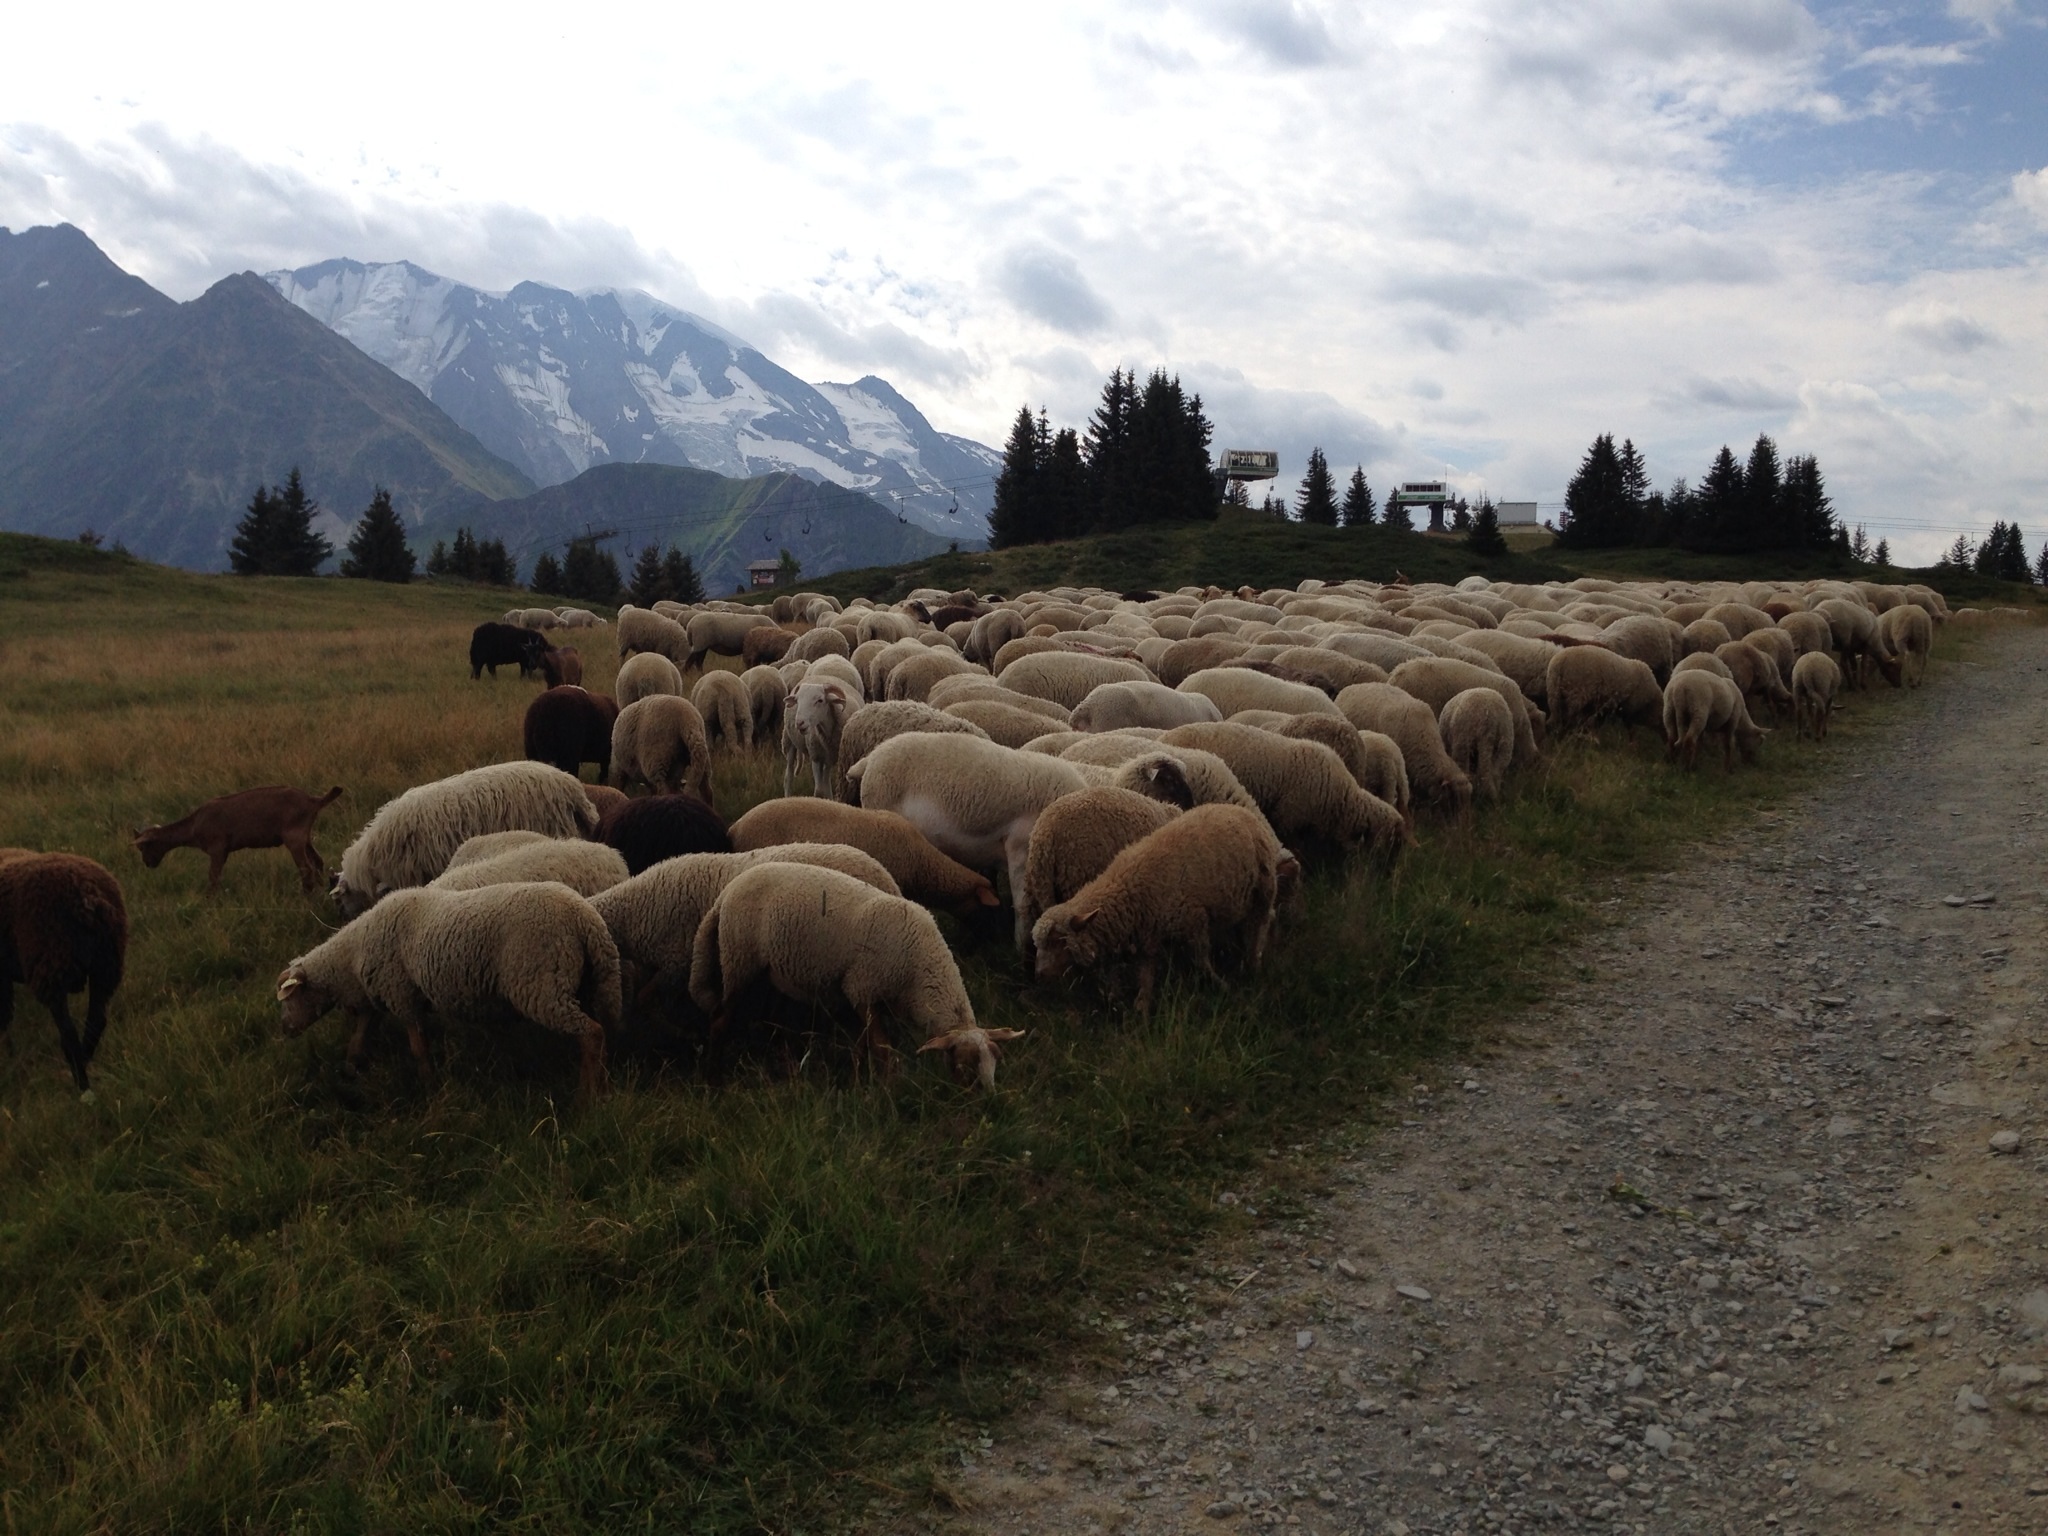 Sheep above Les Houches, France